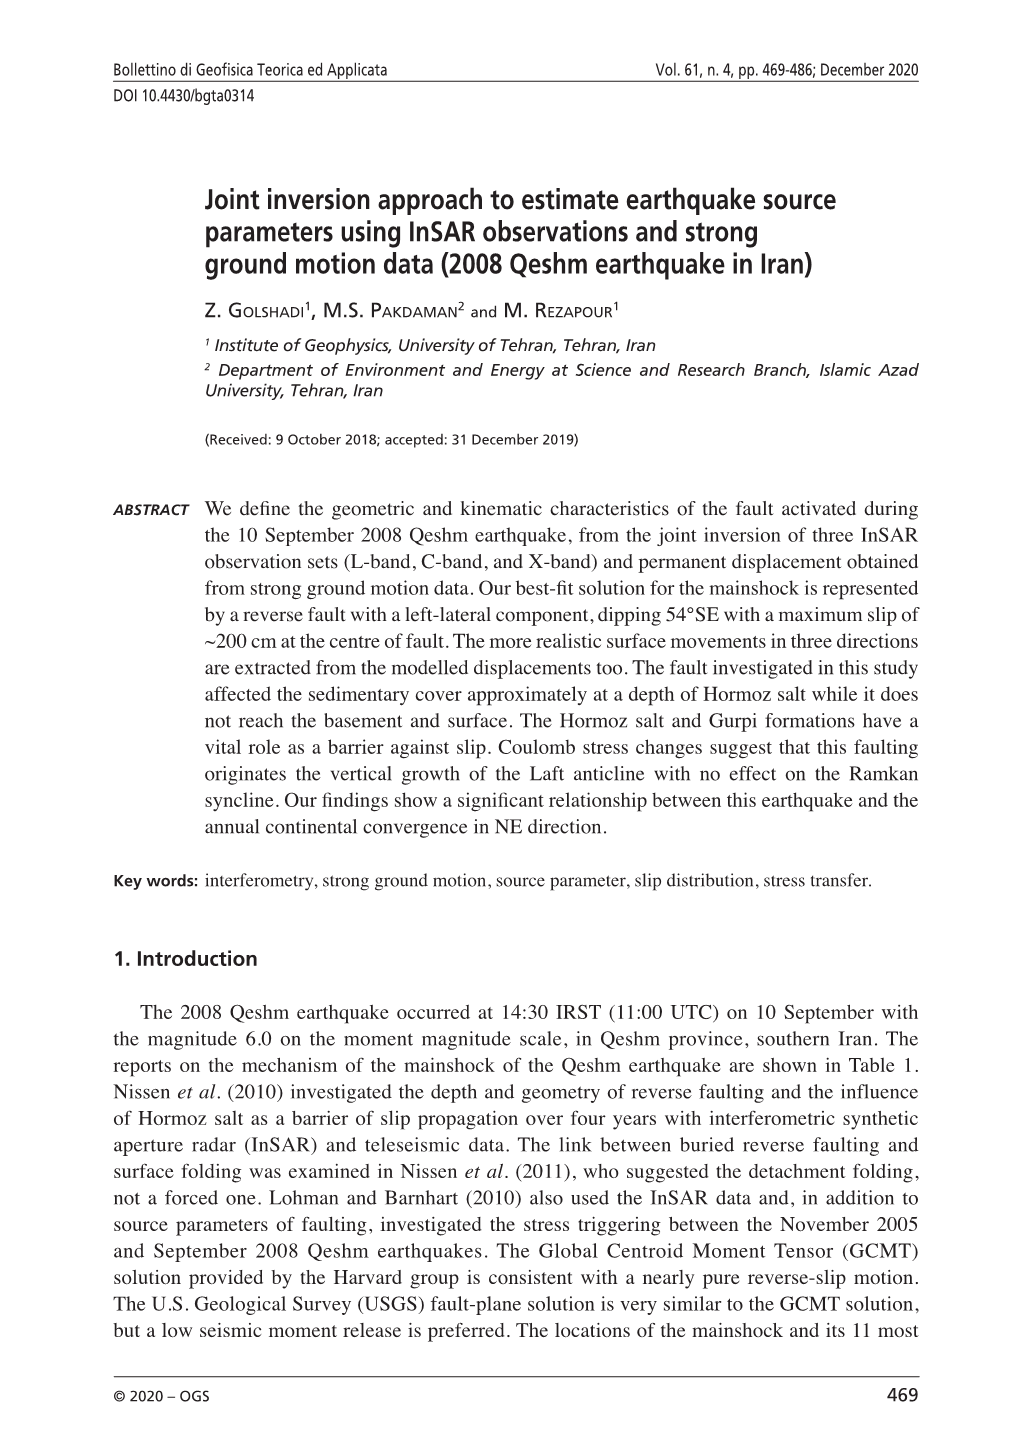 Joint Inversion Approach to Estimate Earthquake Source Parameters Using Insar Observations and Strong Ground Motion Data (2008 Qeshm Earthquake in Iran)